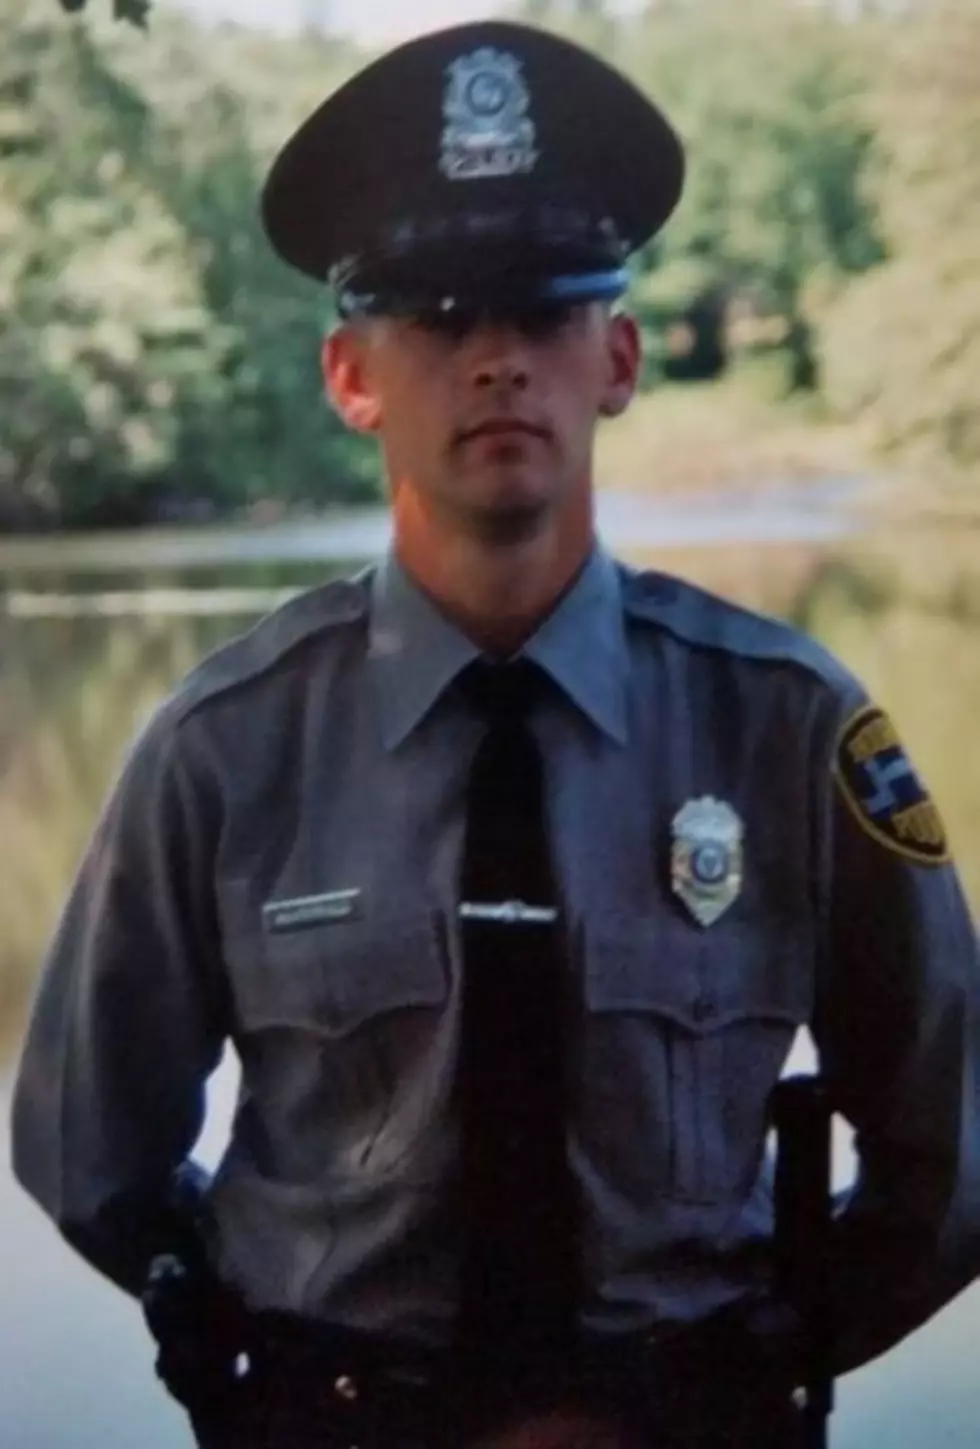 Procession Planned For Injured Bourne Police Officer